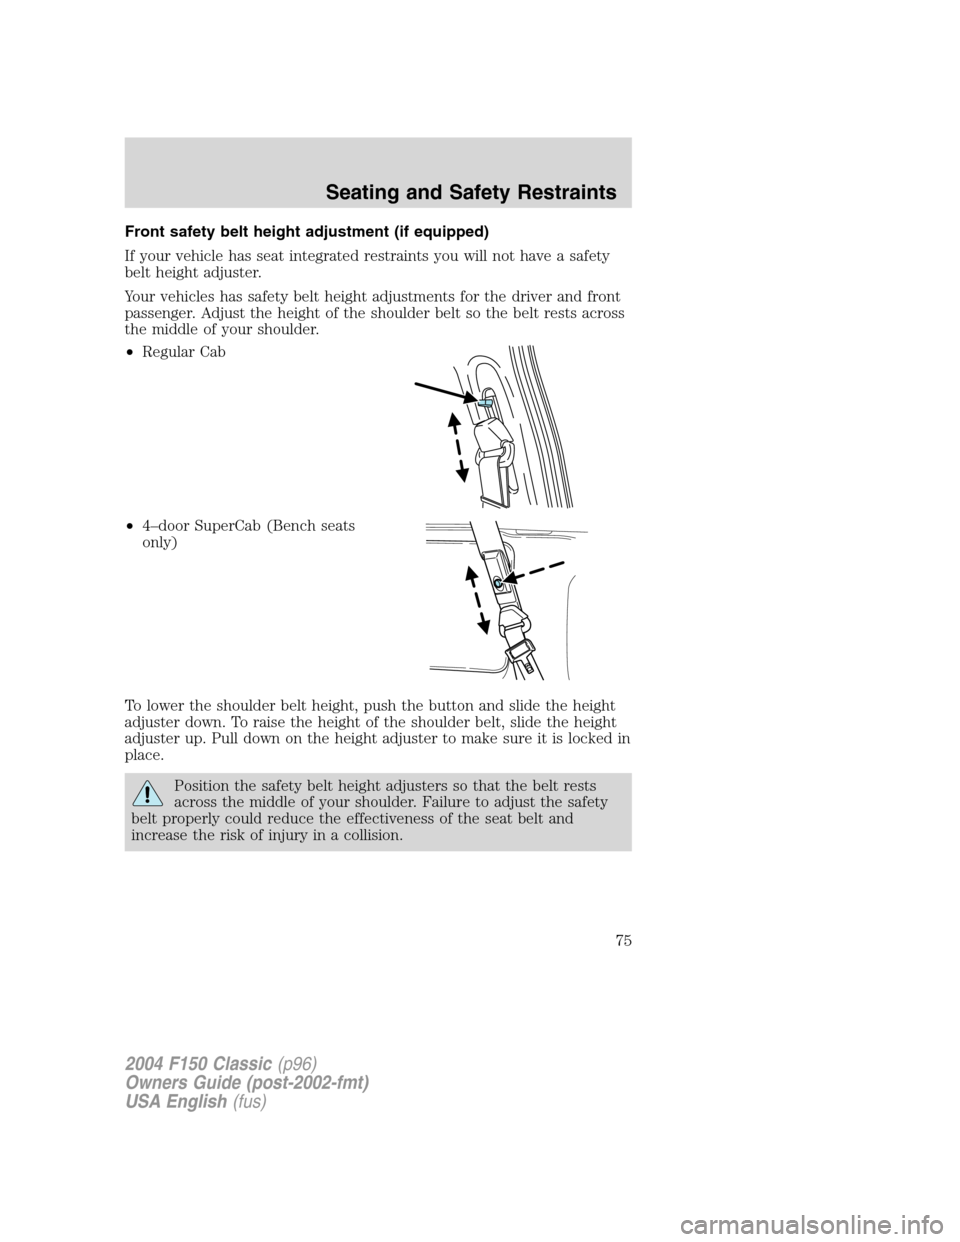 FORD F150 2004 11.G Herritage Owners Manual Front safety belt height adjustment (if equipped)
If your vehicle has seat integrated restraints you will not have a safety
belt height adjuster.
Your vehicles has safety belt height adjustments for t